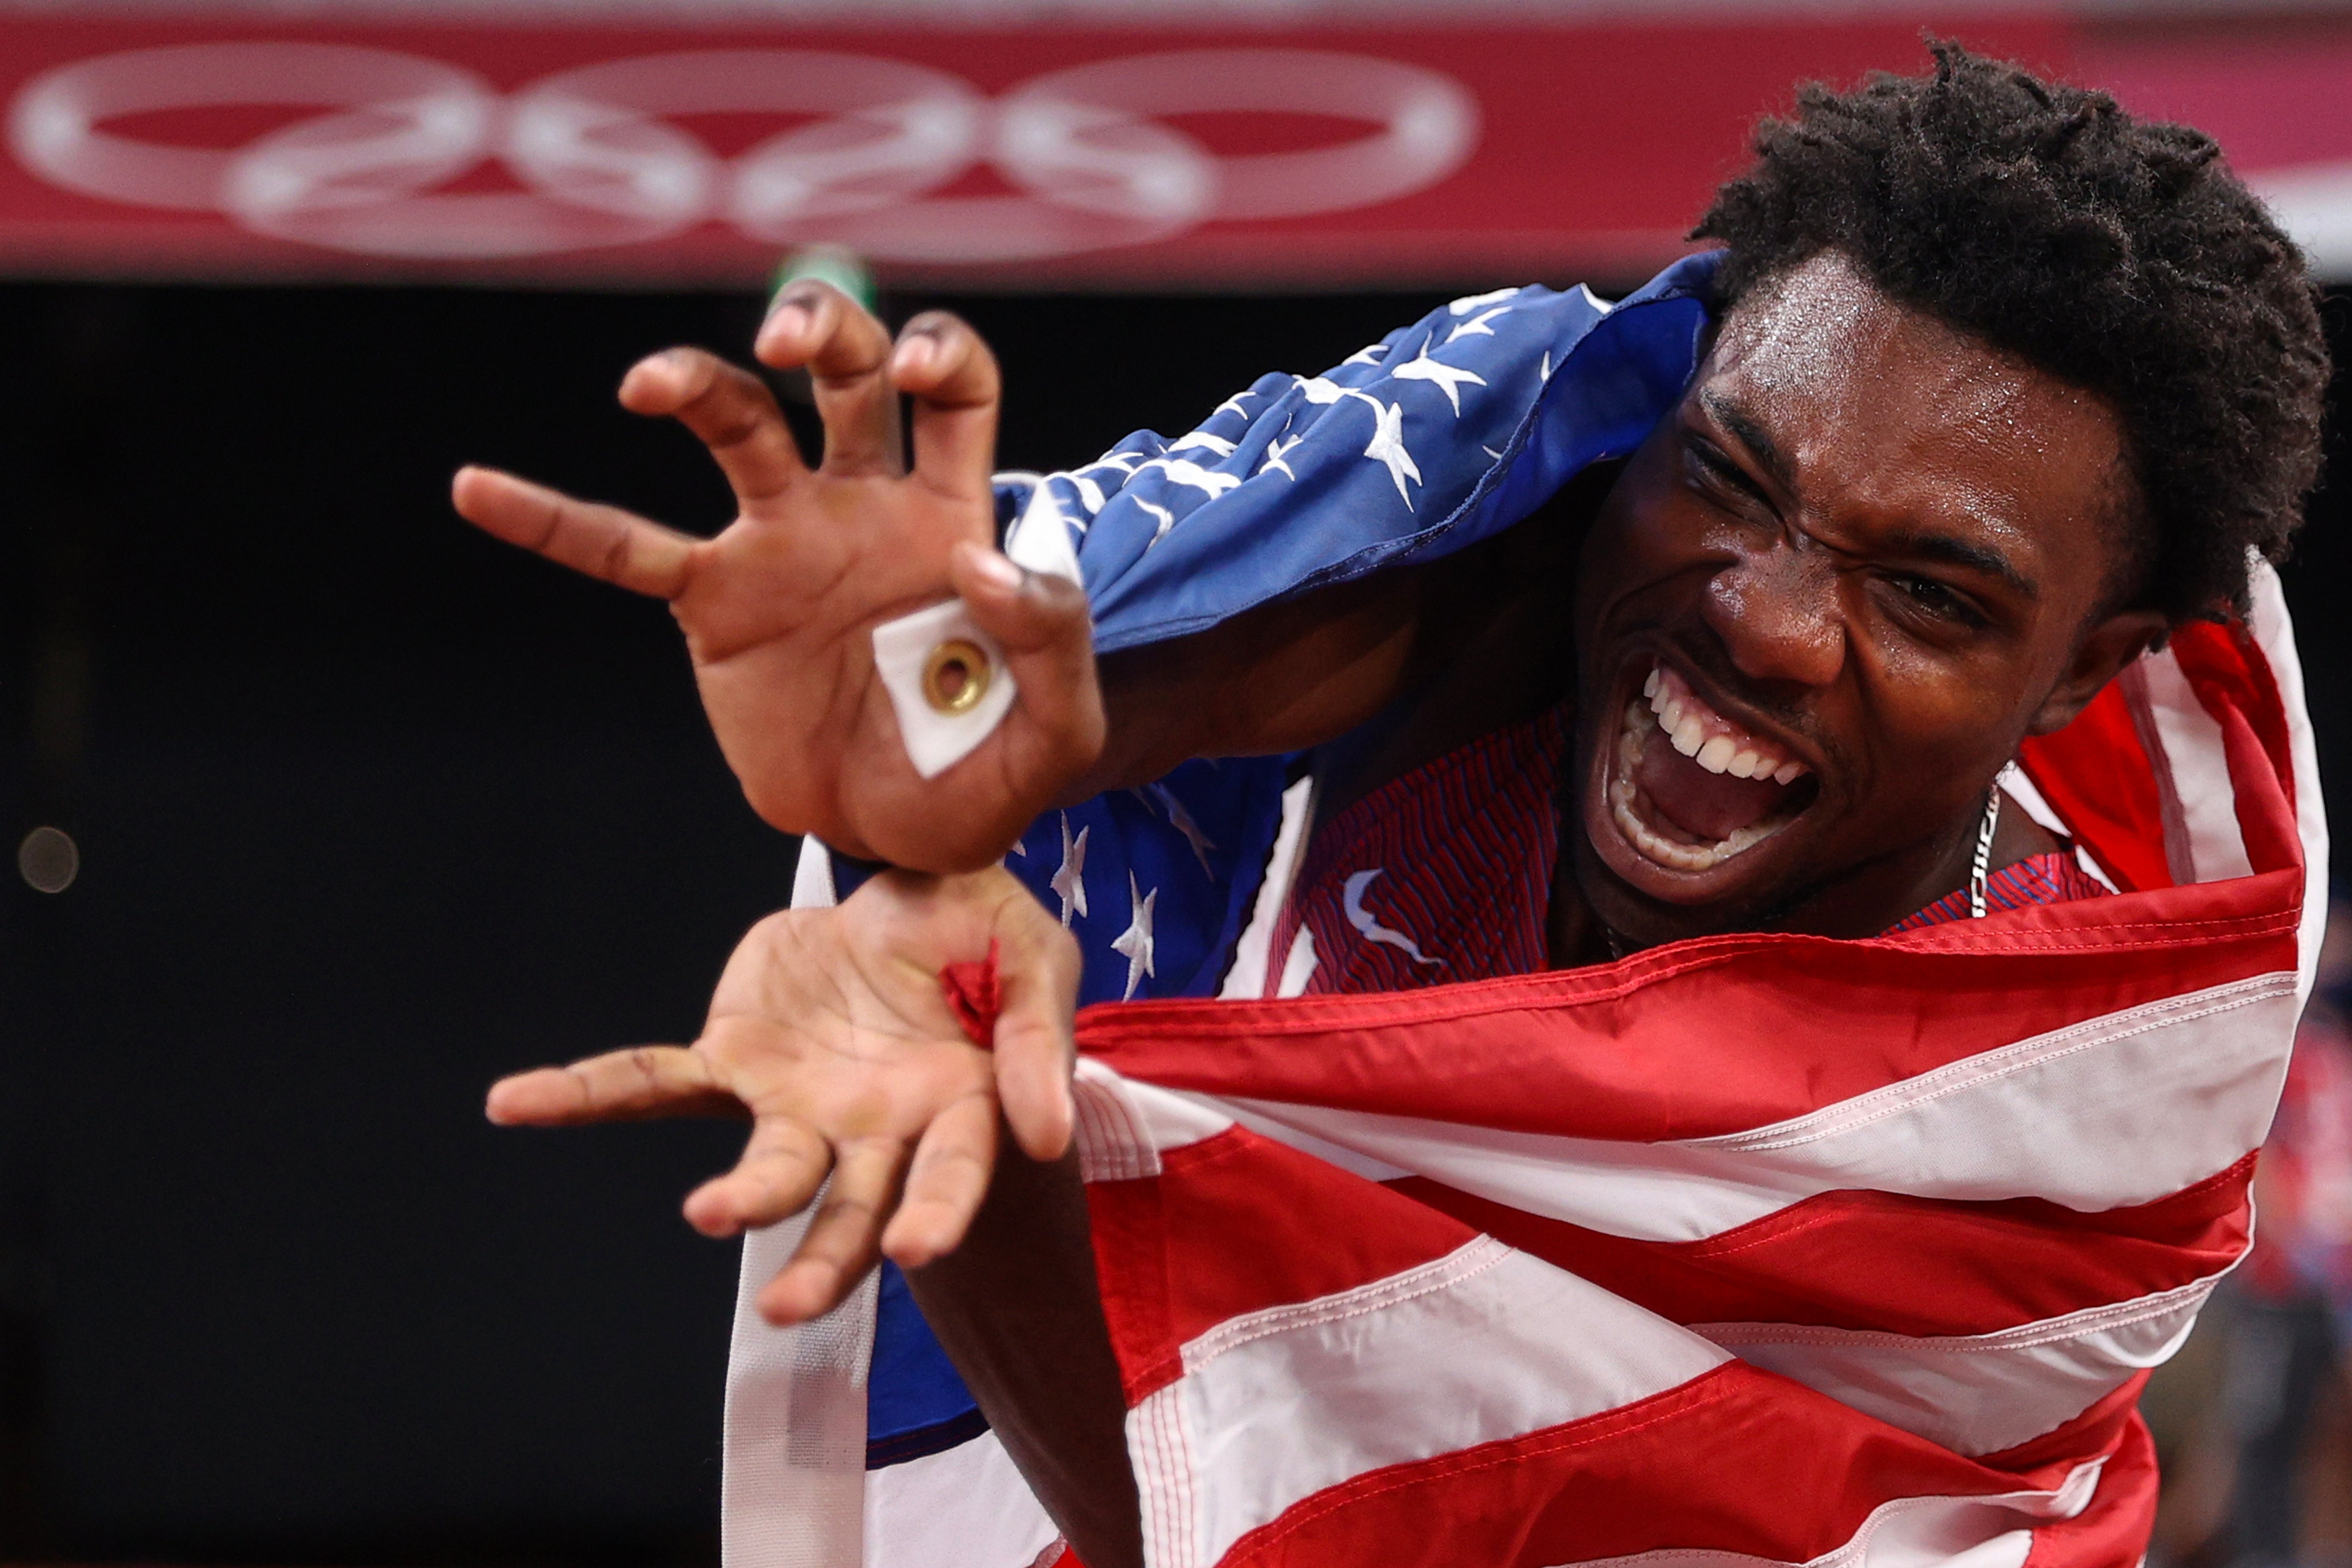 Noah Lyles of Team United States celebrates after winning the bronze medal in the Men's 200m Final on day twelve of the Tokyo 2020 Olympic Games at Olympic Stadium on August 4, 2021 in Tokyo, Japan.